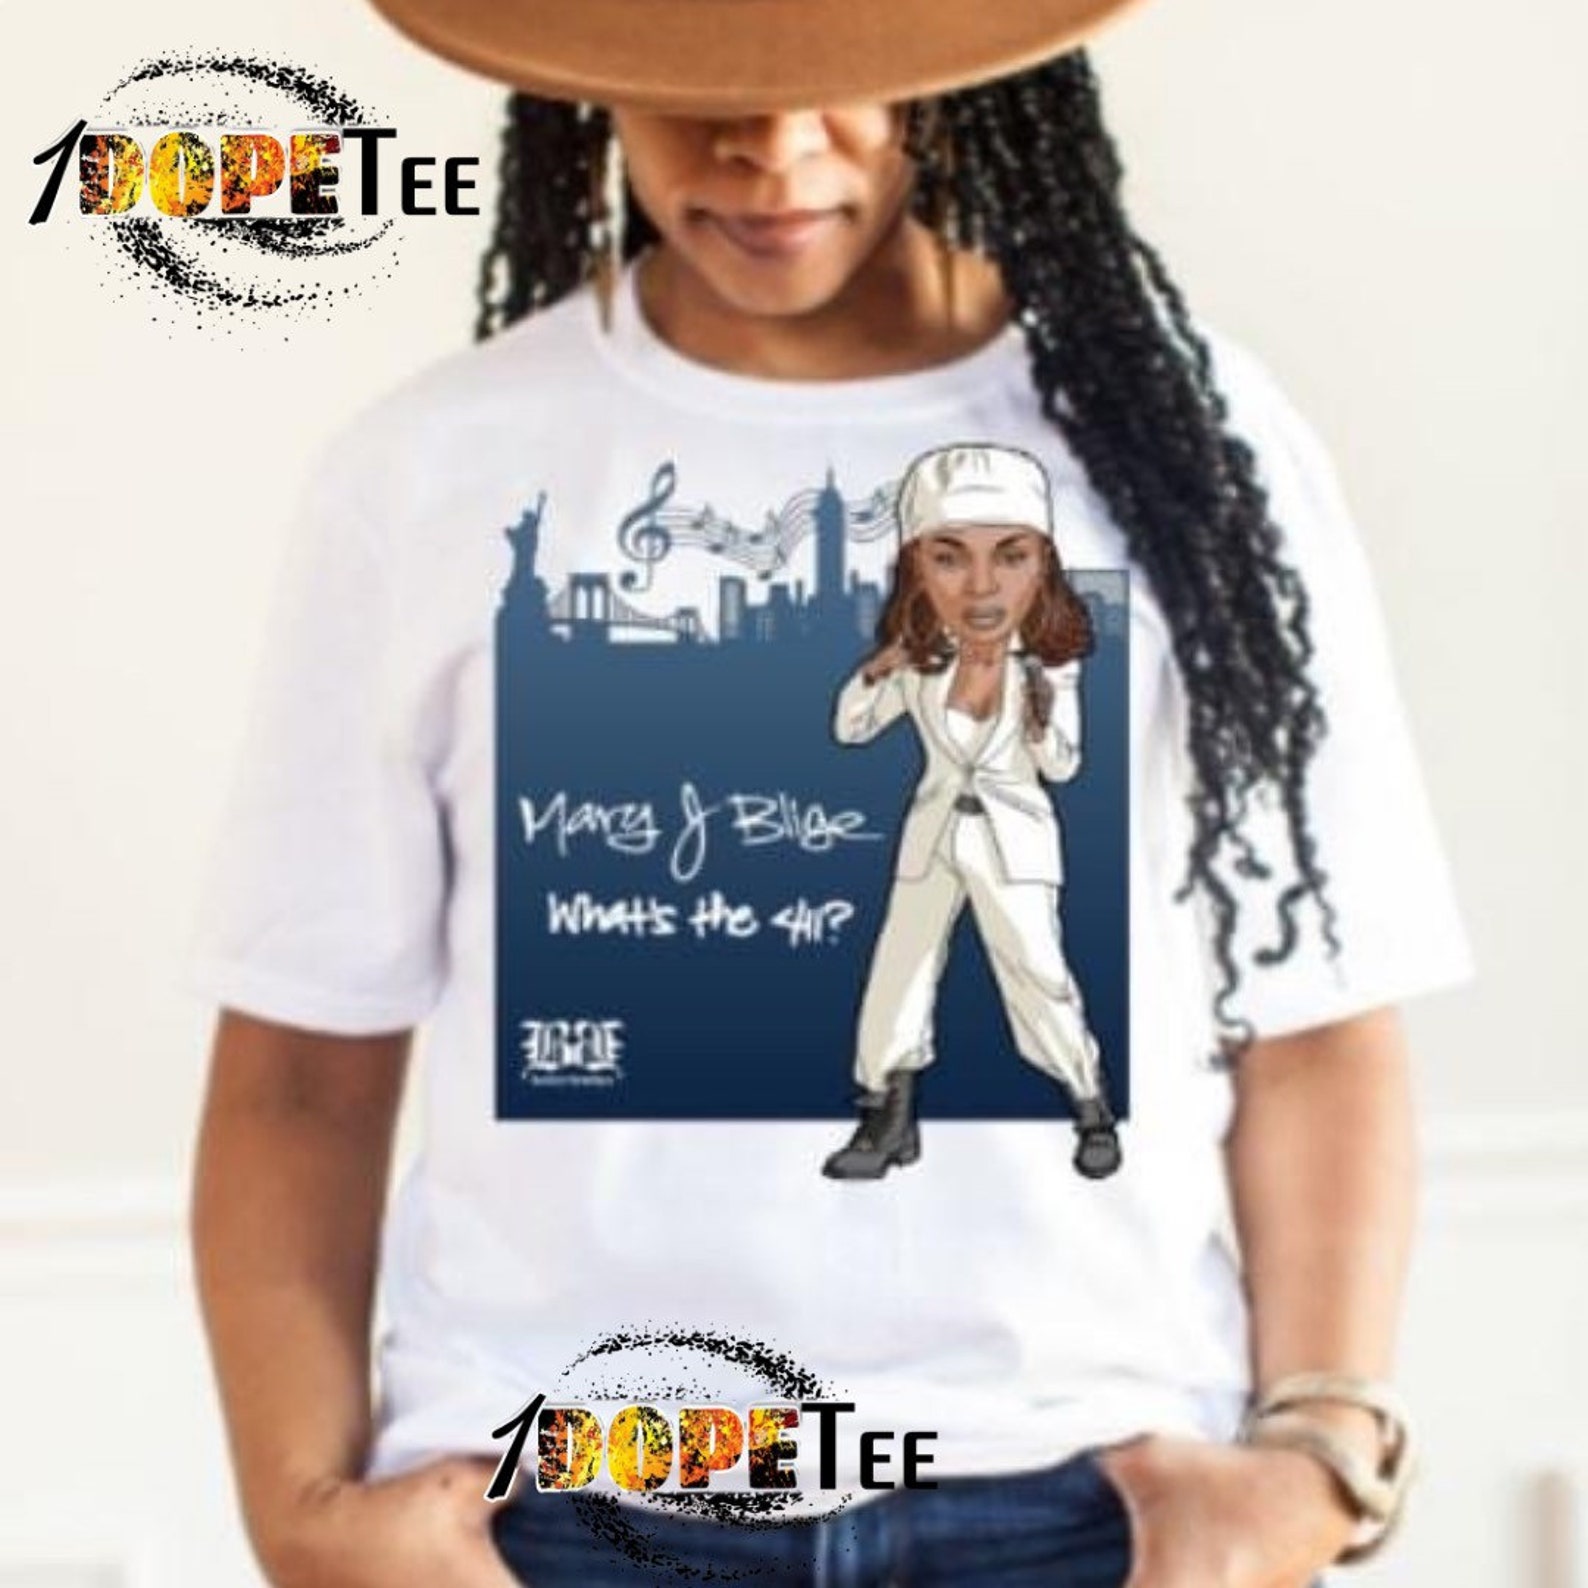 Mary J Blige Graphic T-shirt | Etsy